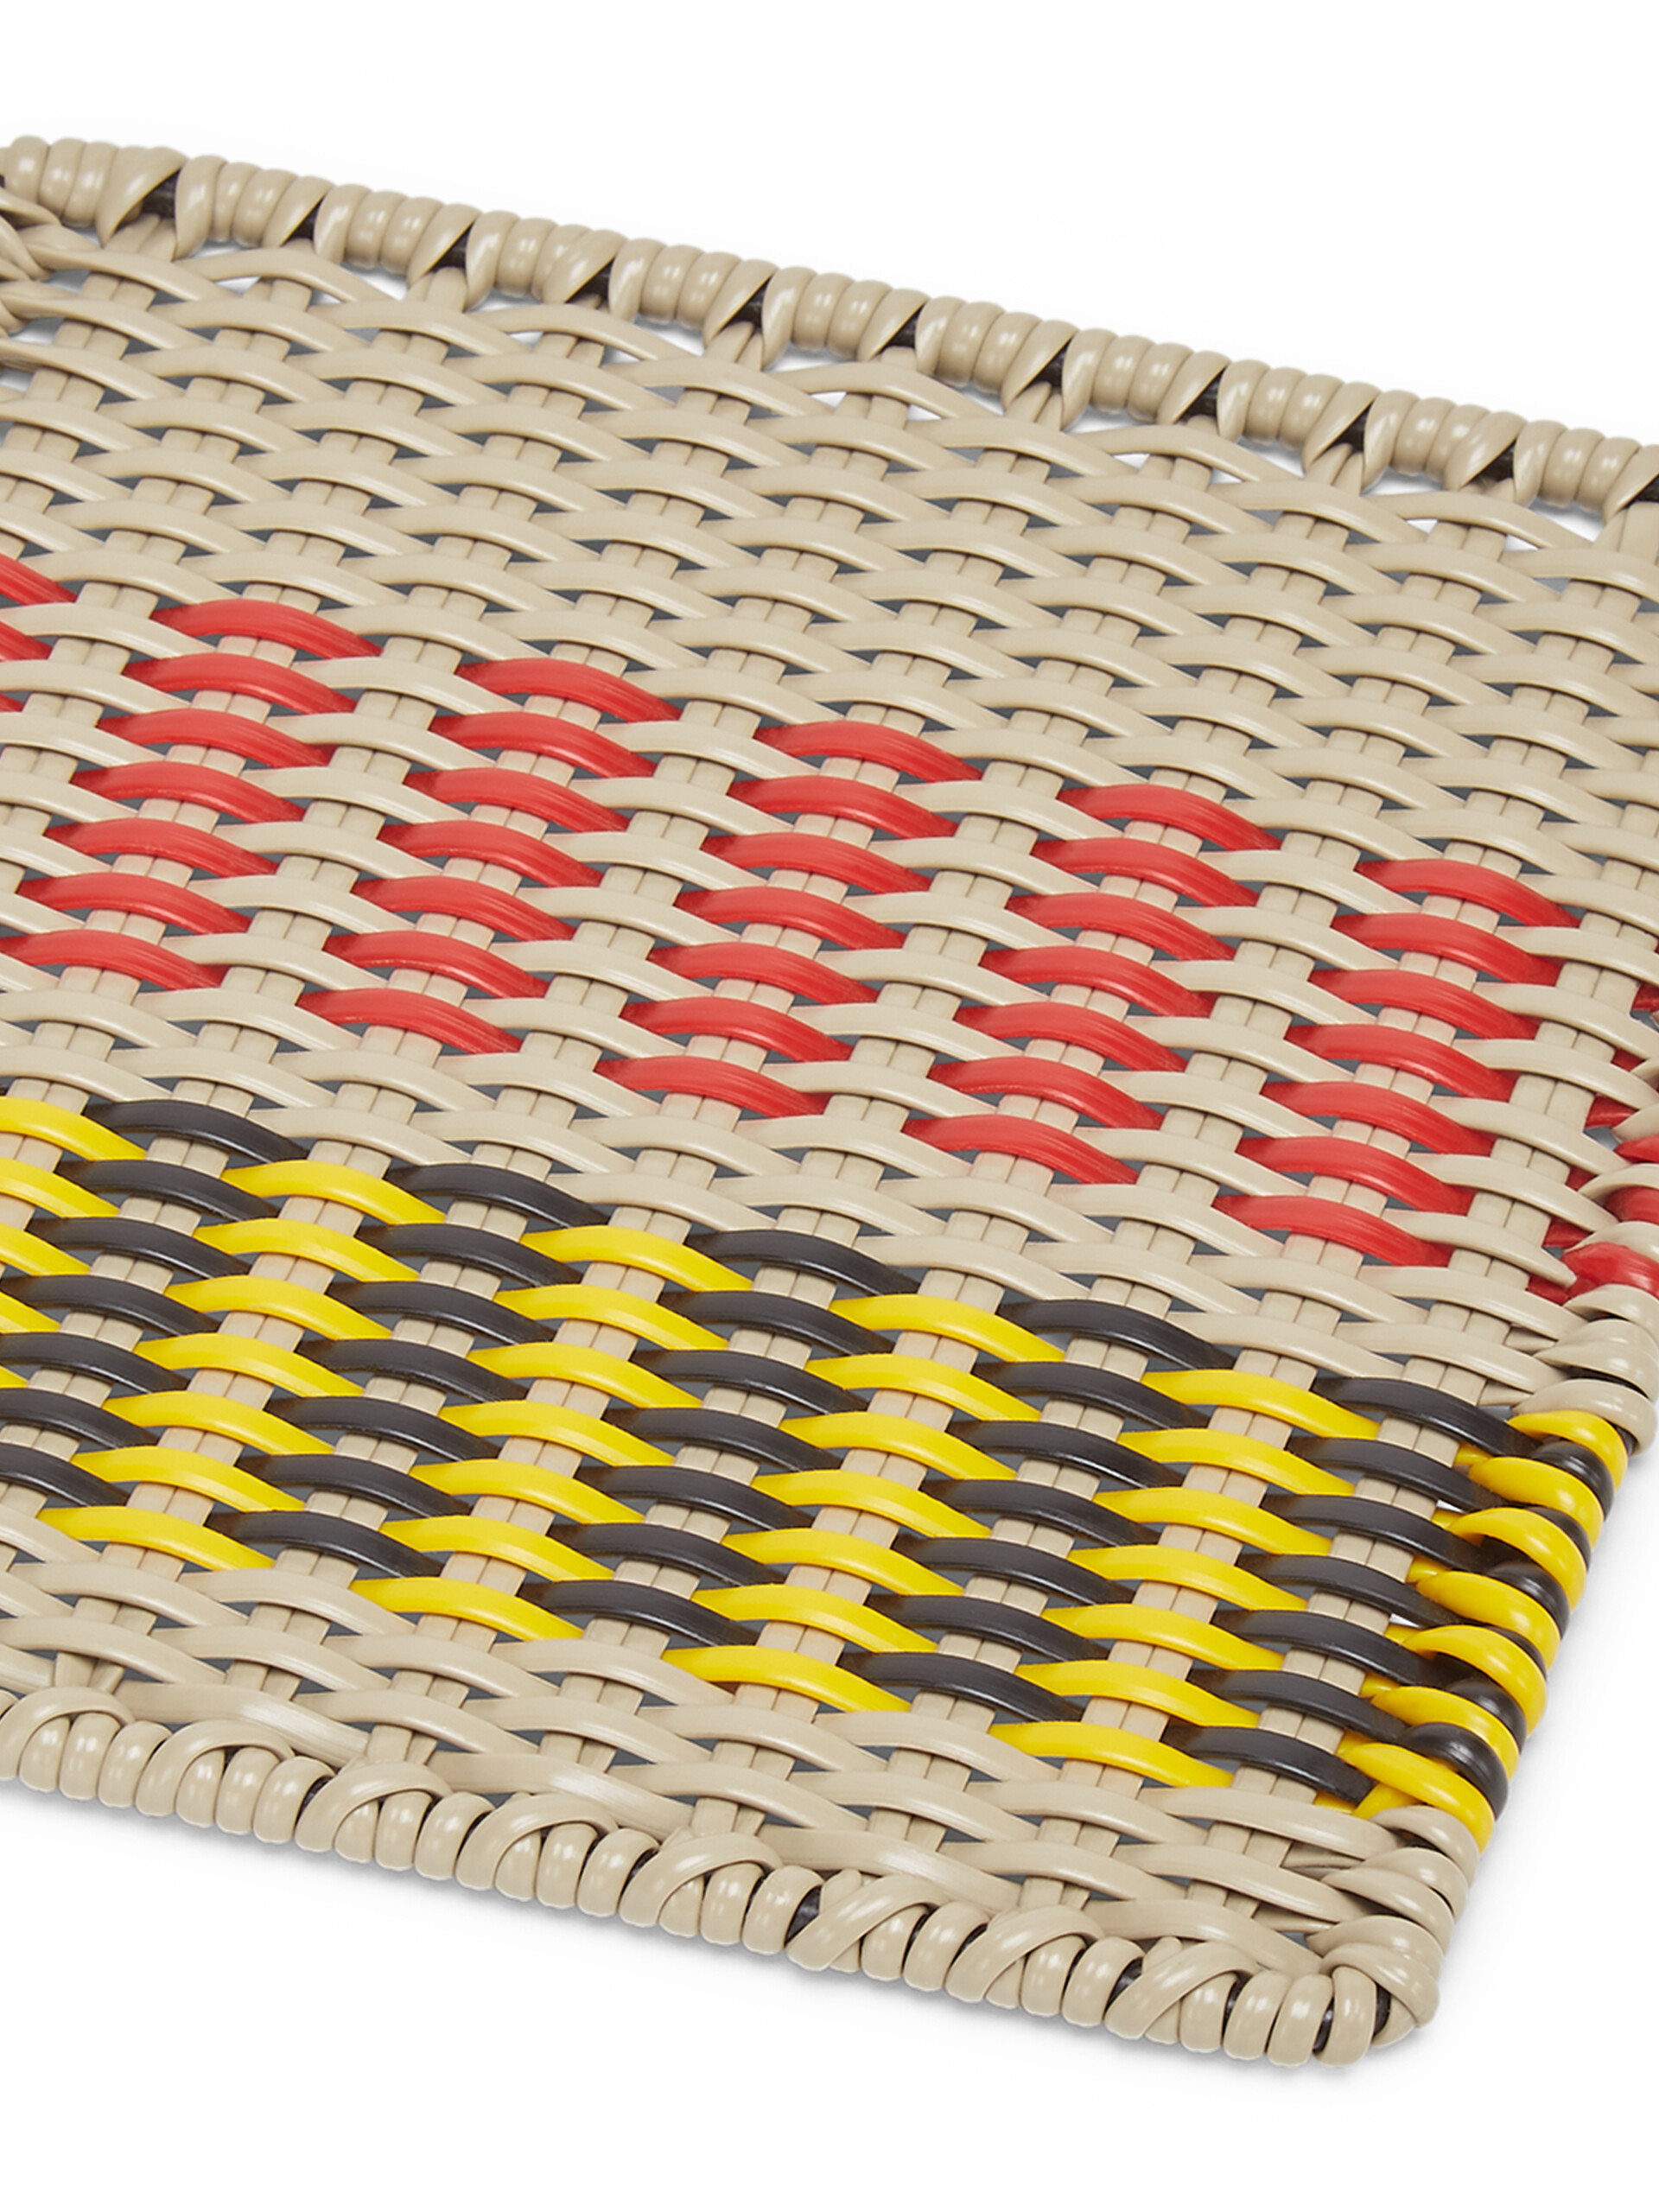 MARNI MARKET square mat with striped motif in iron and yellow, black, red and beige woven PVC - Accessories - Image 3